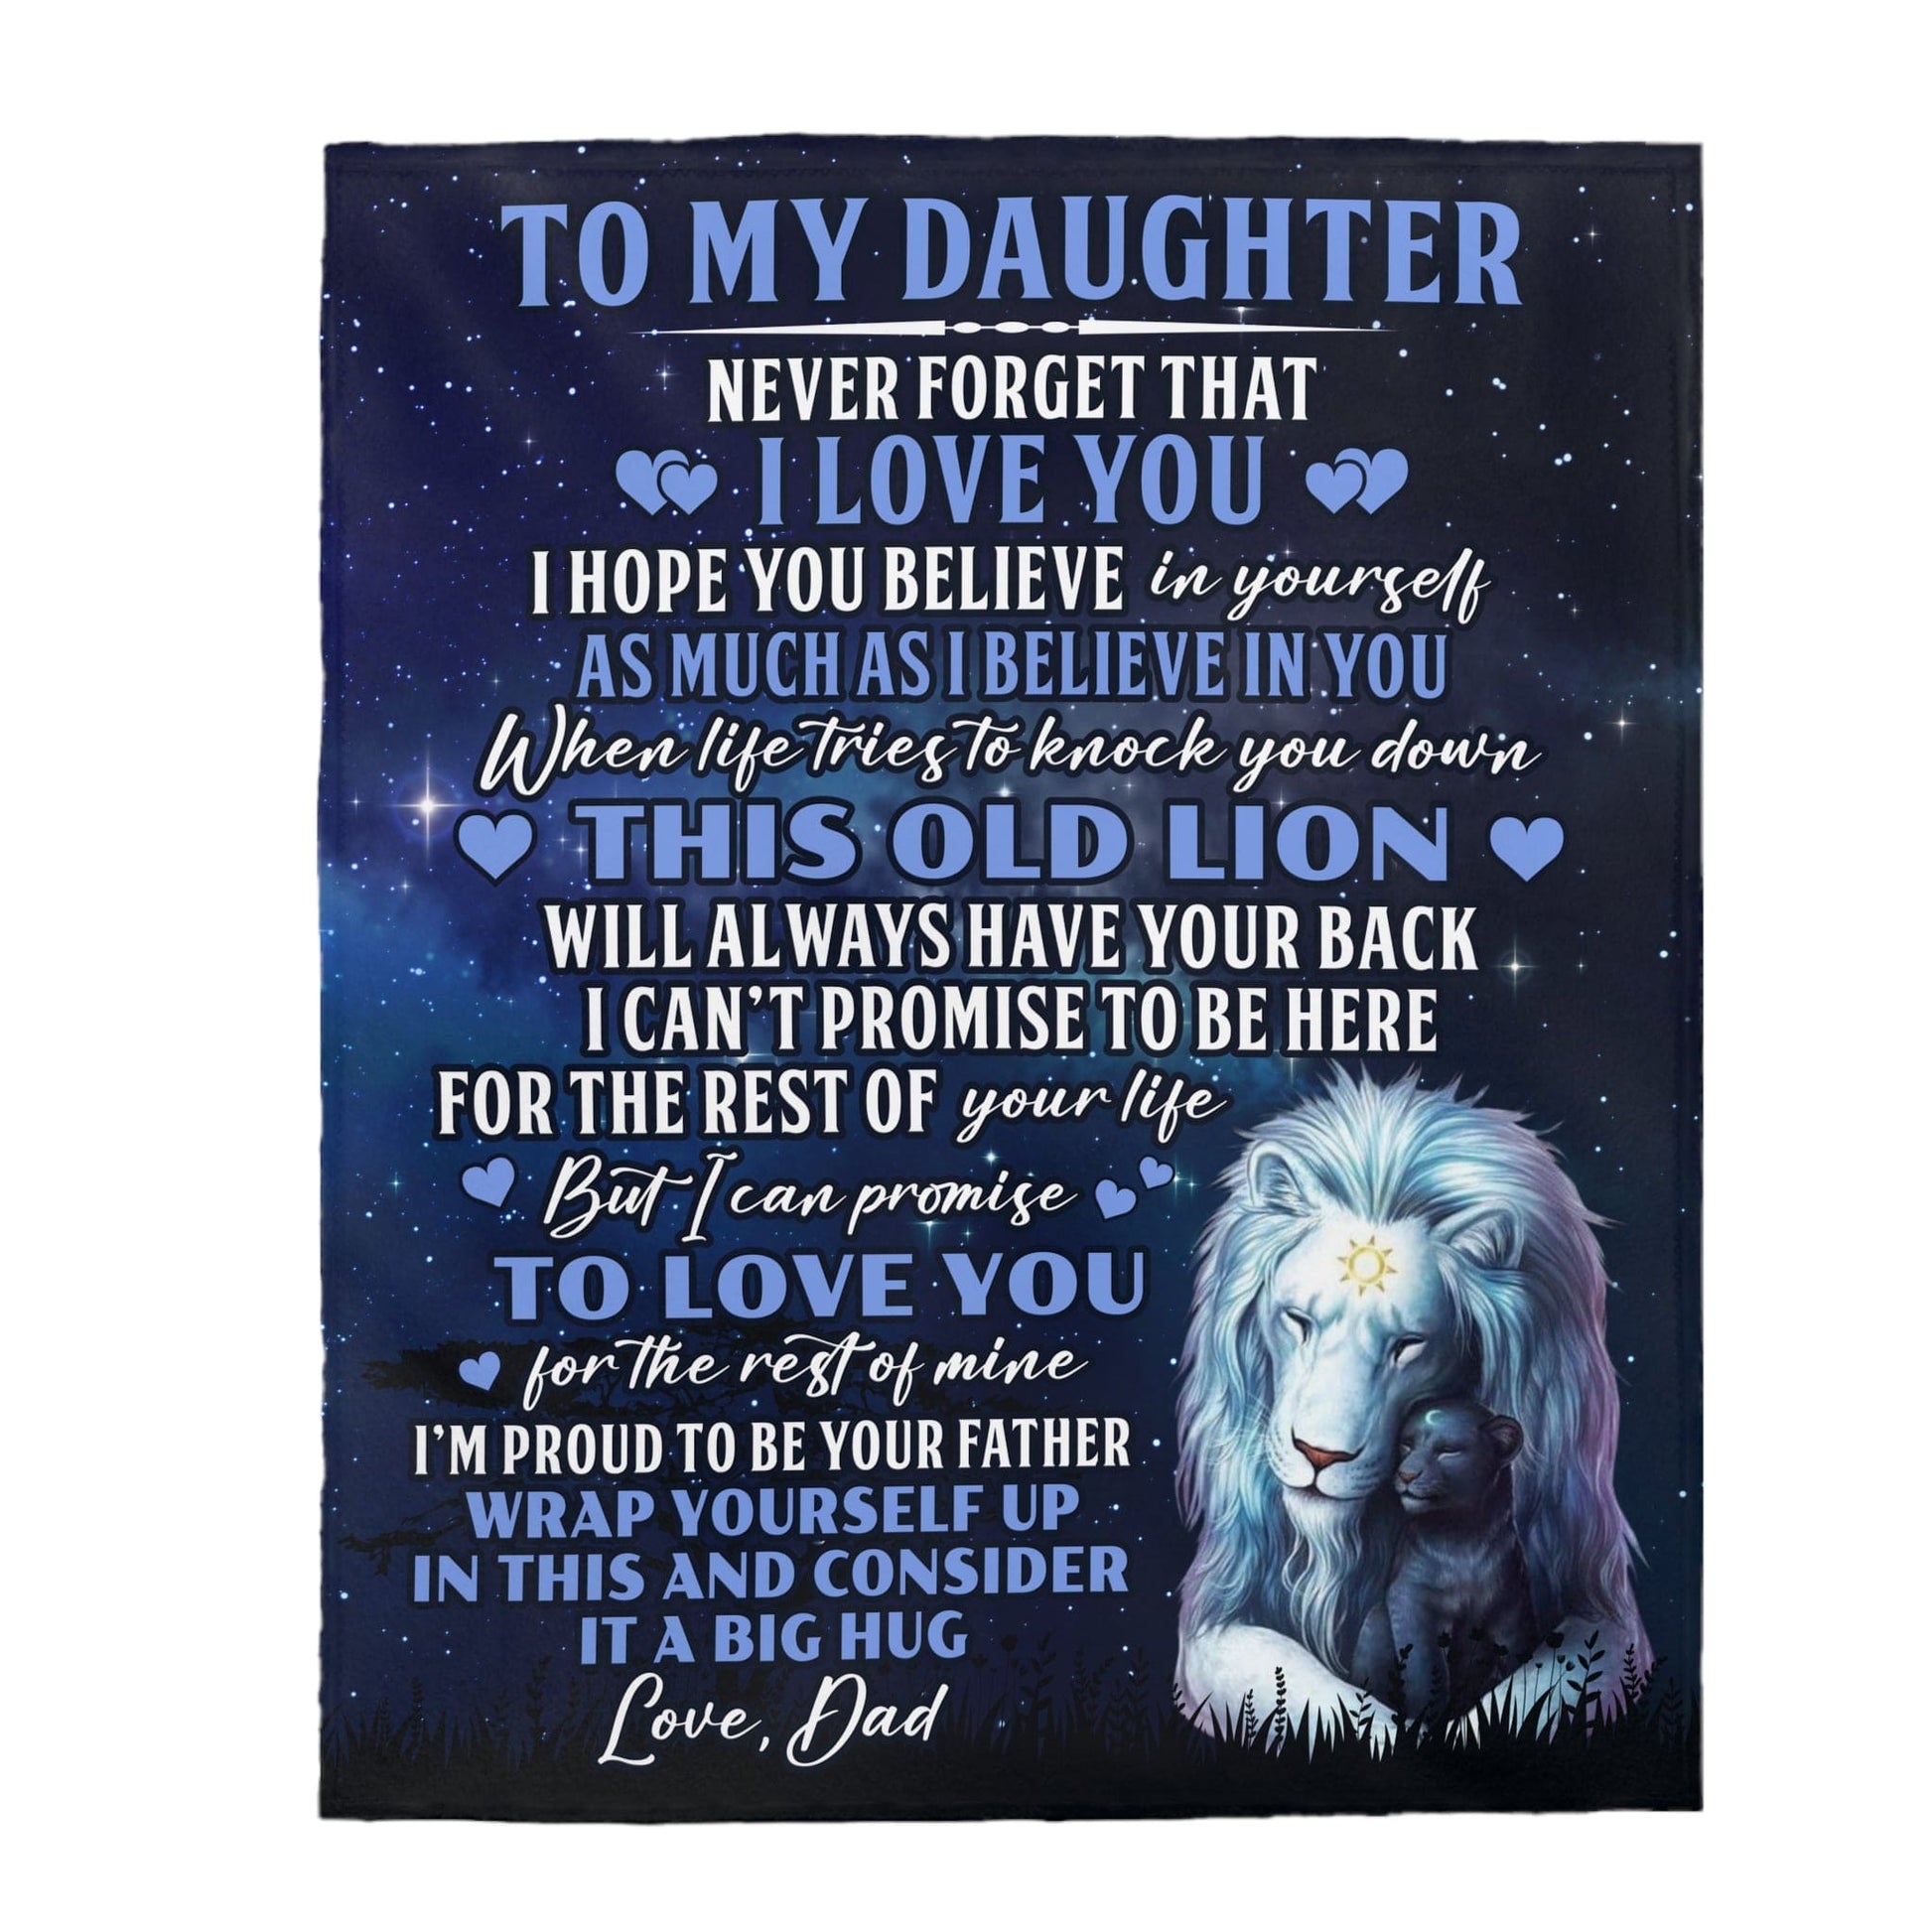 To My Daughter Love Dad - This Old Lion - Cozy Plush Fleece Blanket Gift for Daughter 50"x60"